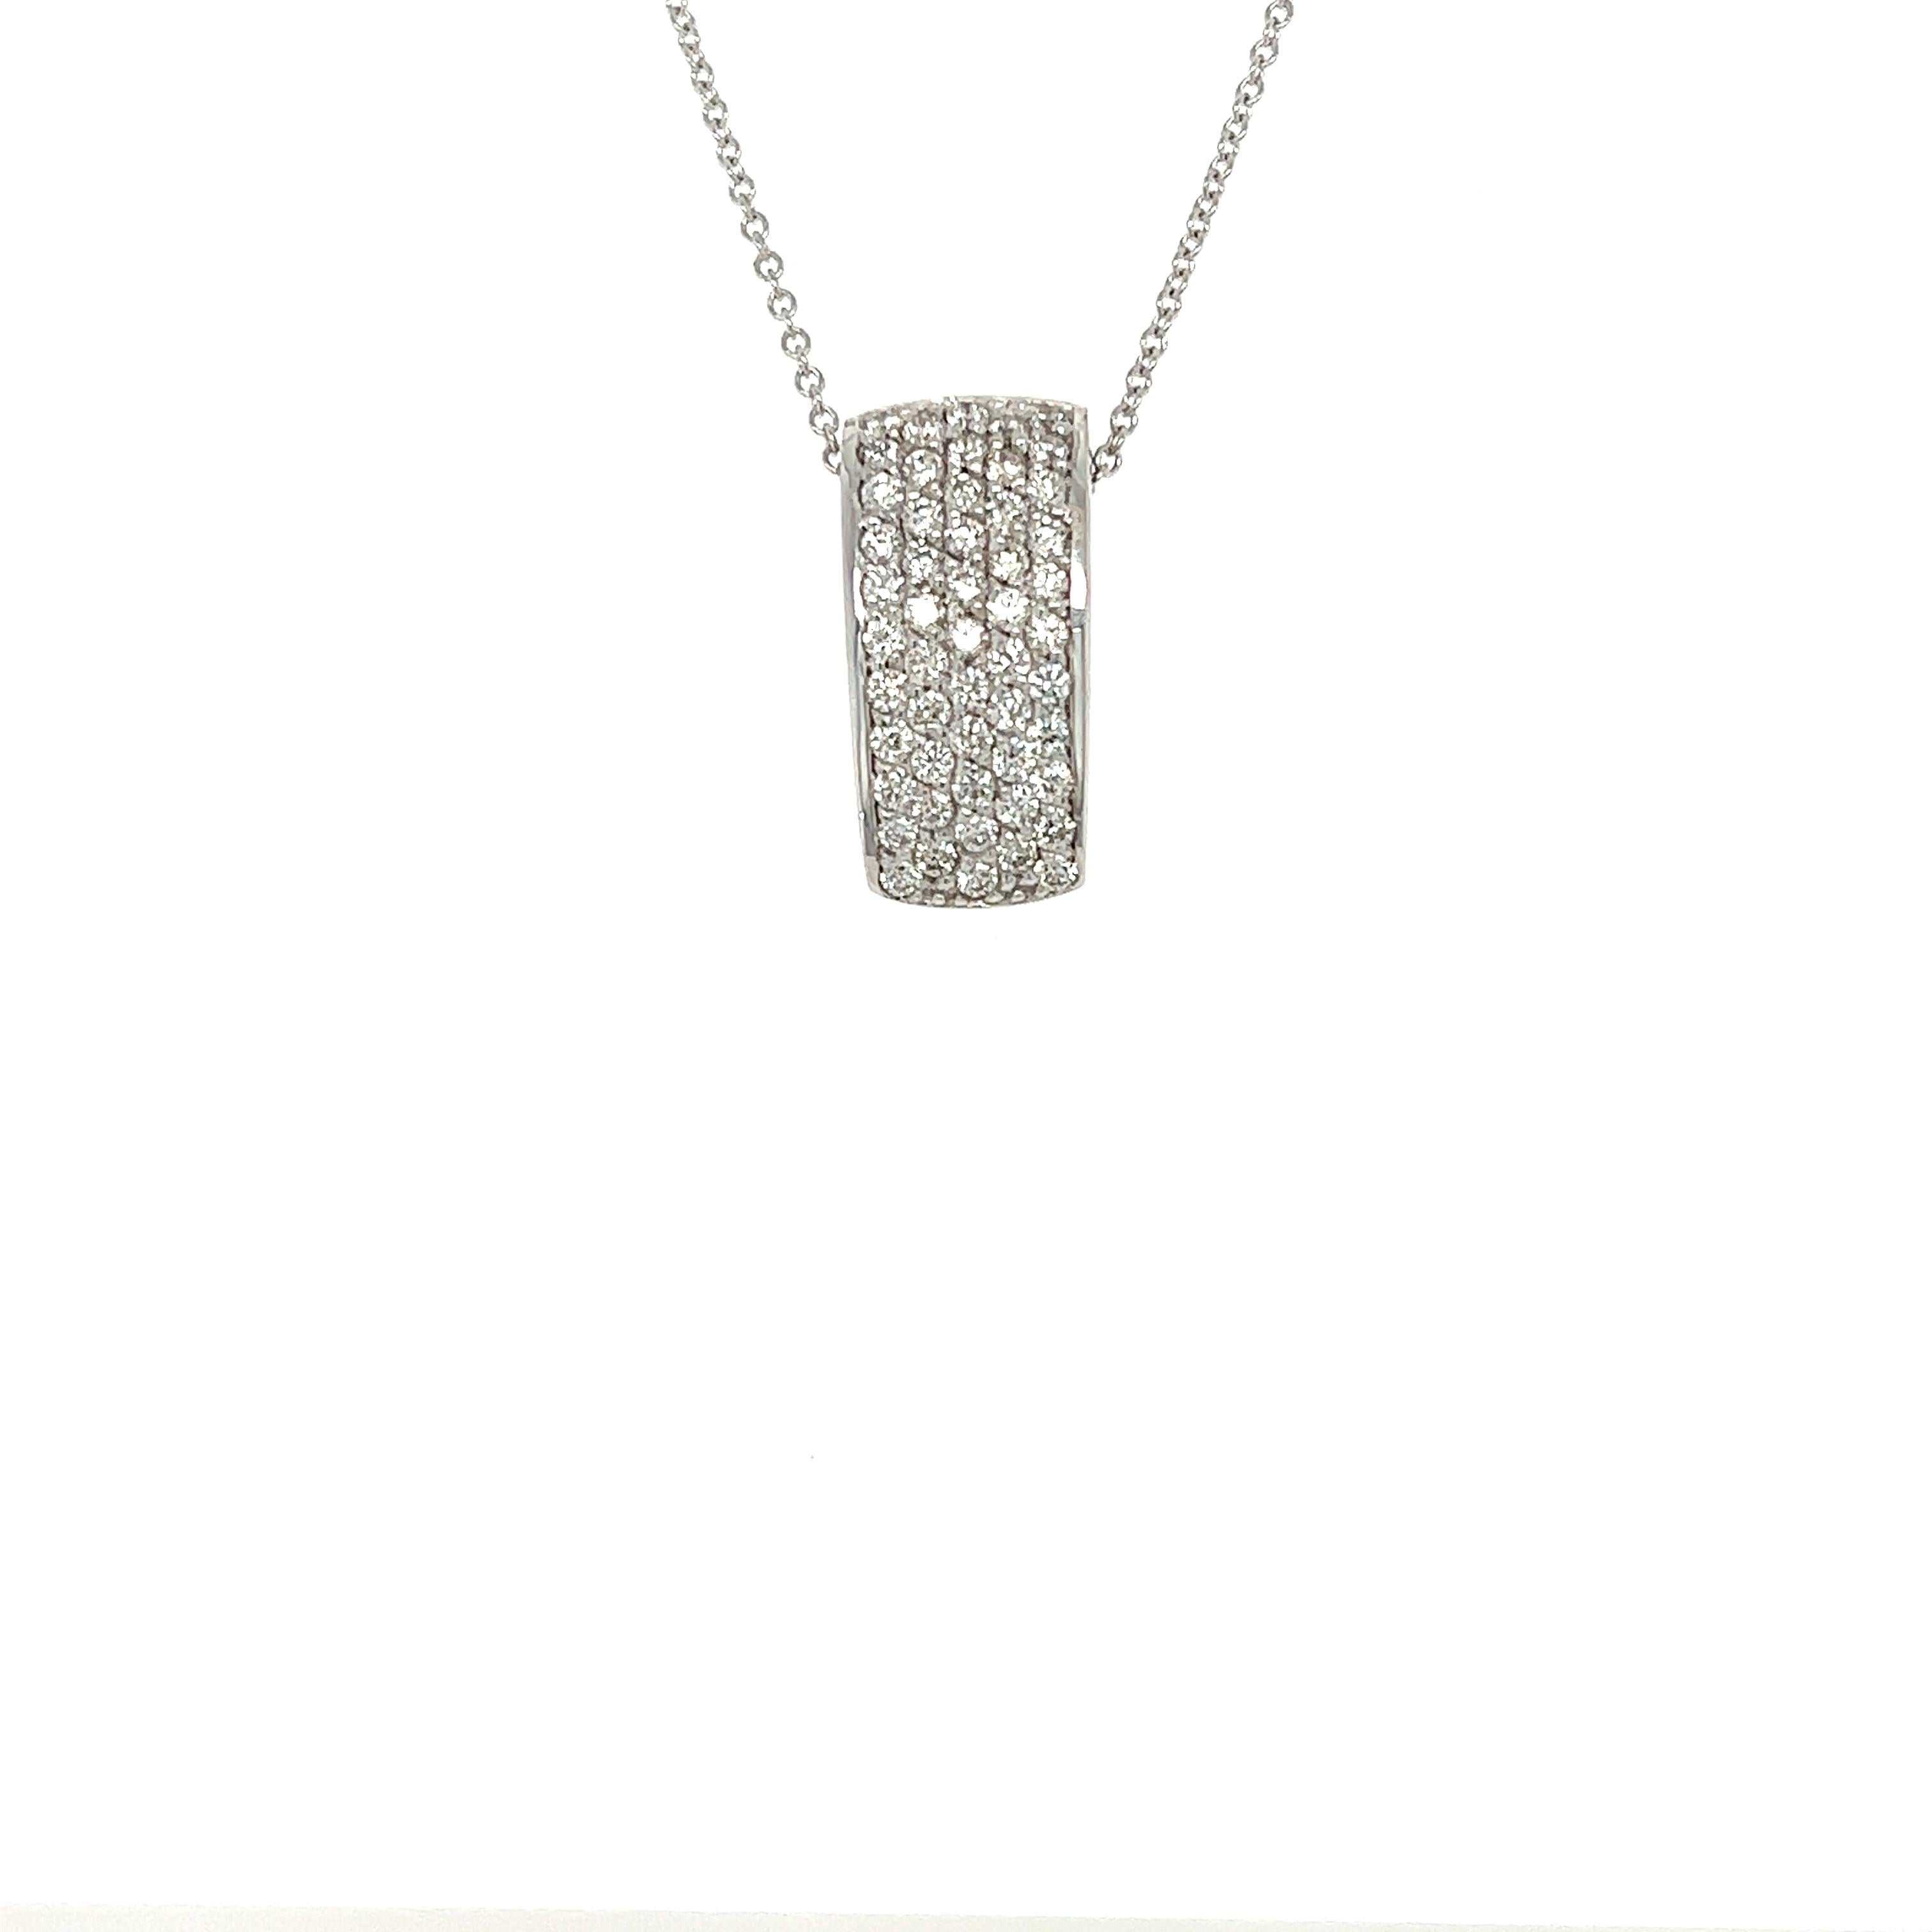 This pendant necklace has Natural Round Cut Diamonds that weigh 0.63 carats. The clarity and color of the necklace are VS-H.

The approximate weight of this necklace is 4.5 grams. 

The necklace is 16 inches long. 